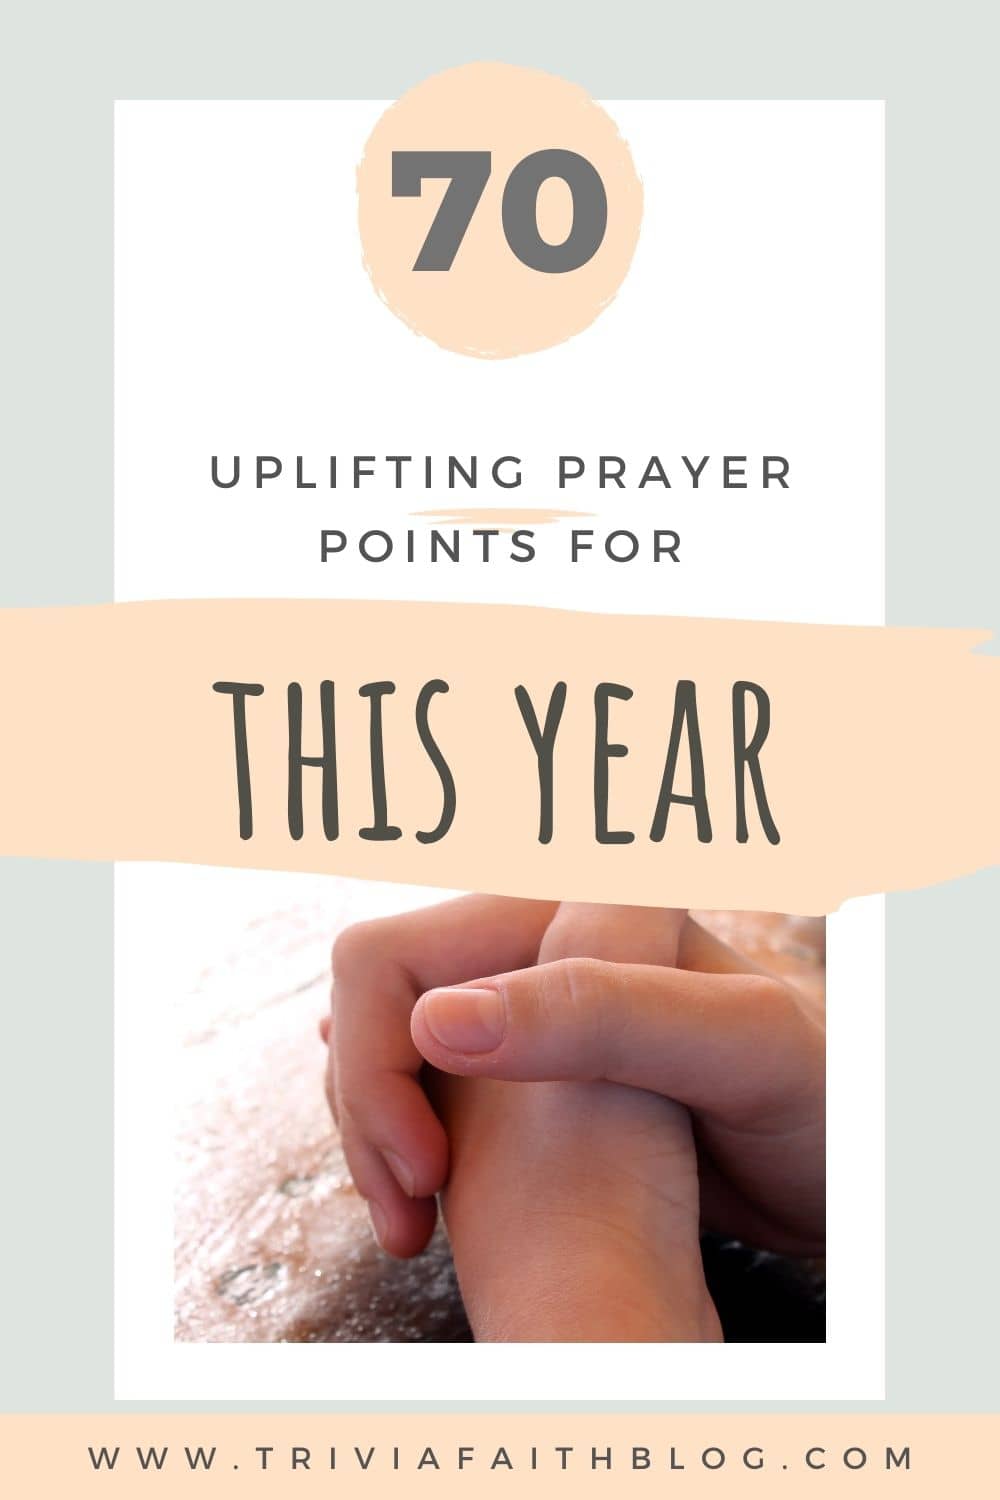 Uplifting Prayer Points For this year